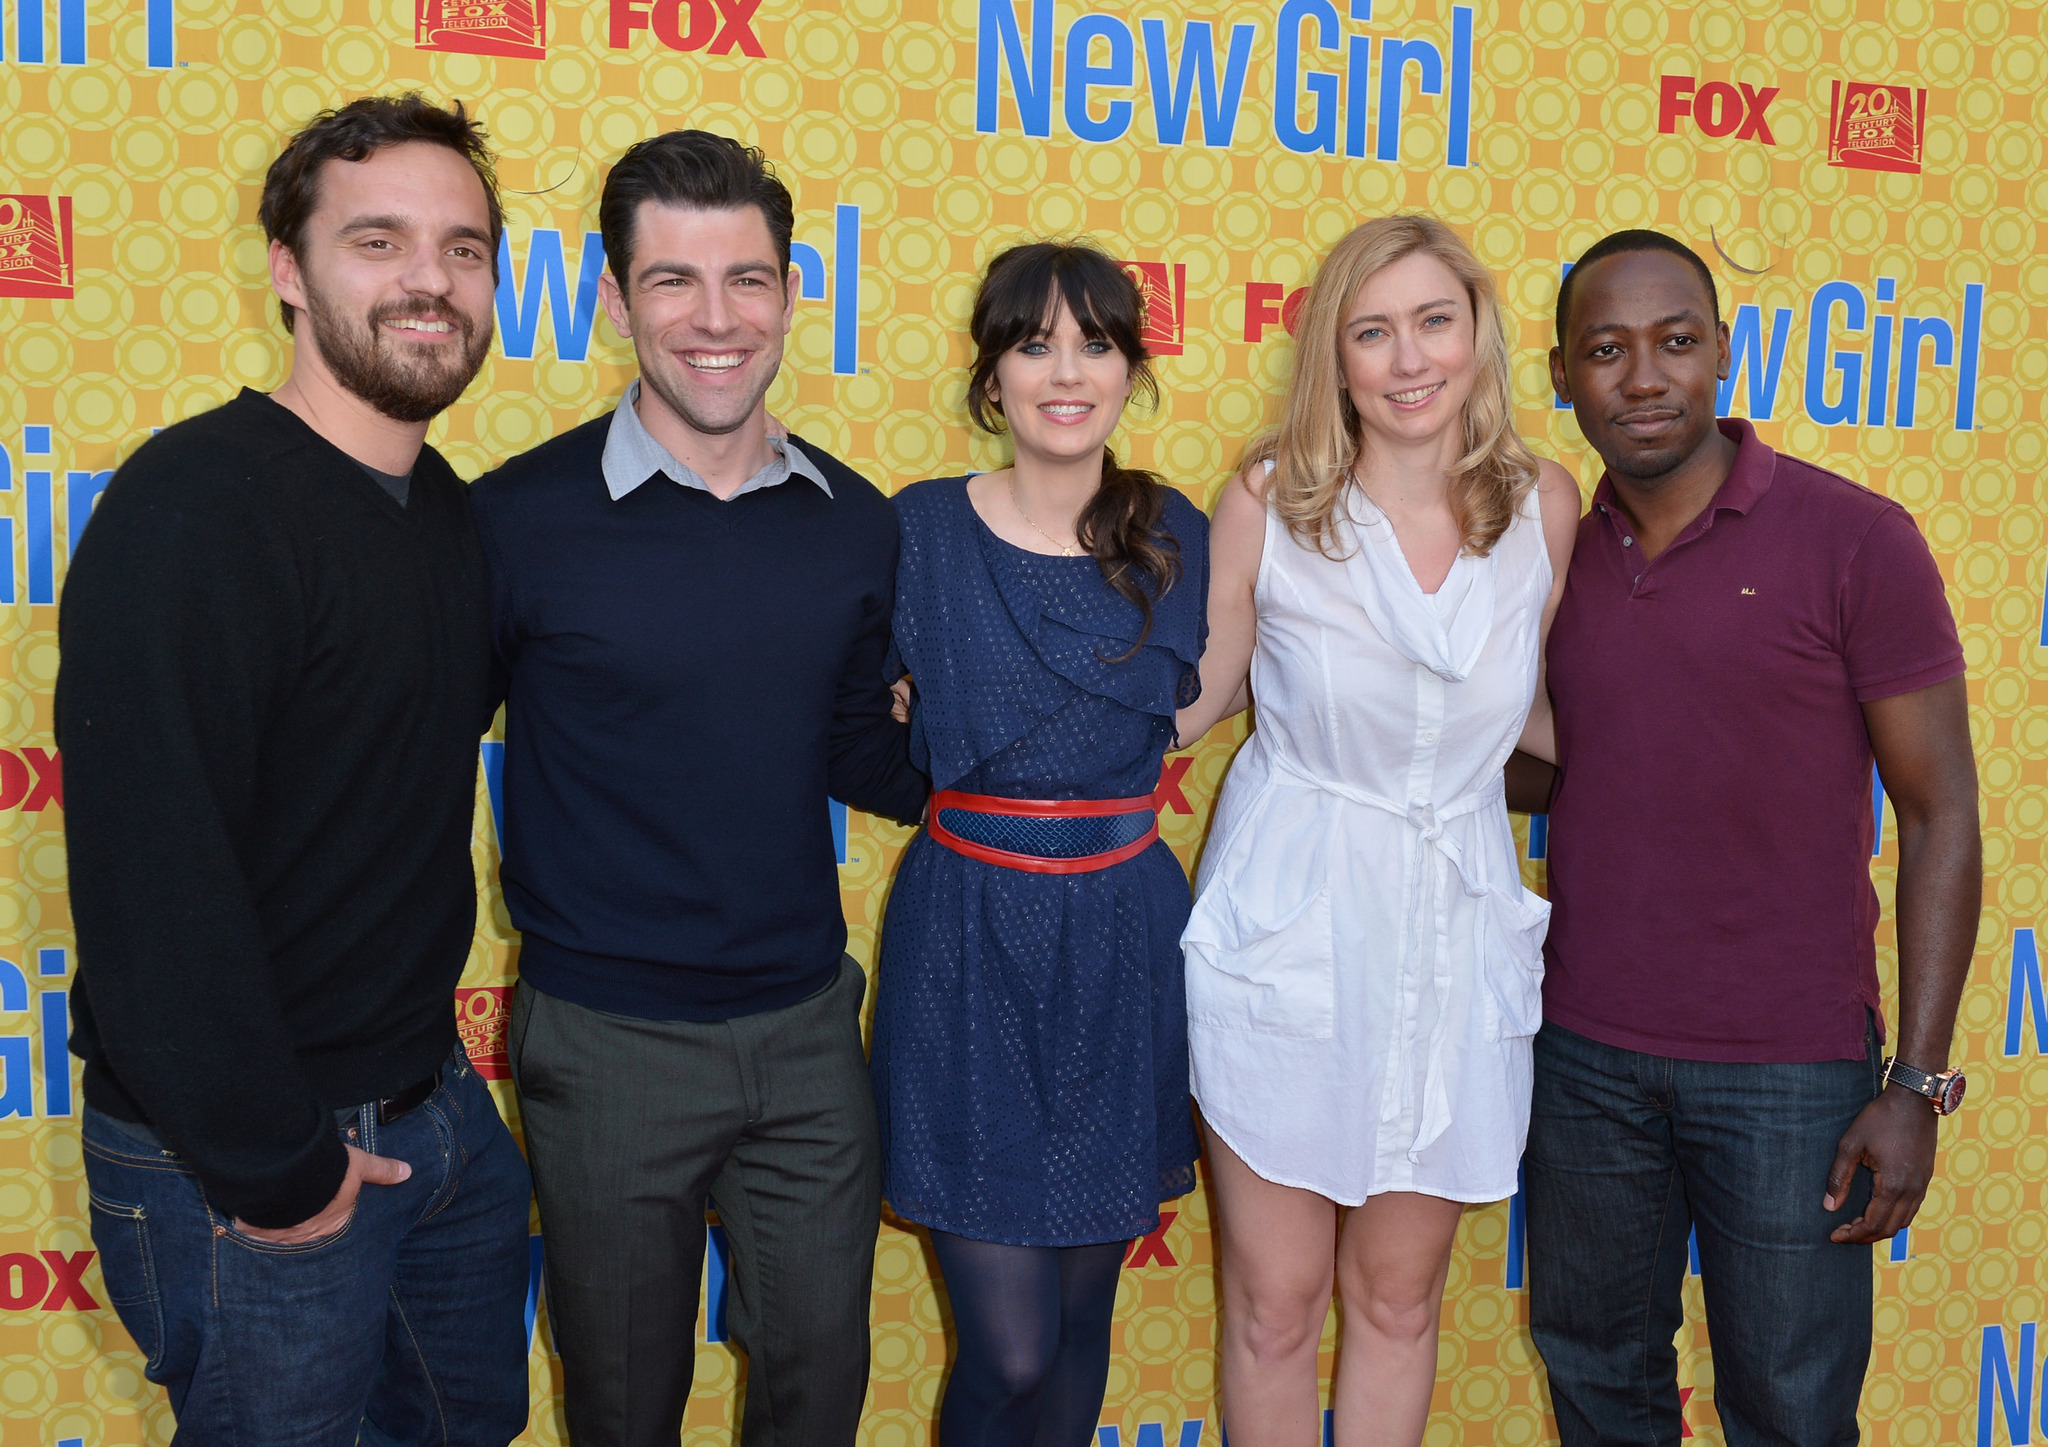 Zooey Deschanel, Max Greenfield, Lamorne Morris, Elizabeth Meriwether and Jake Johnson at event of New Girl (2011)